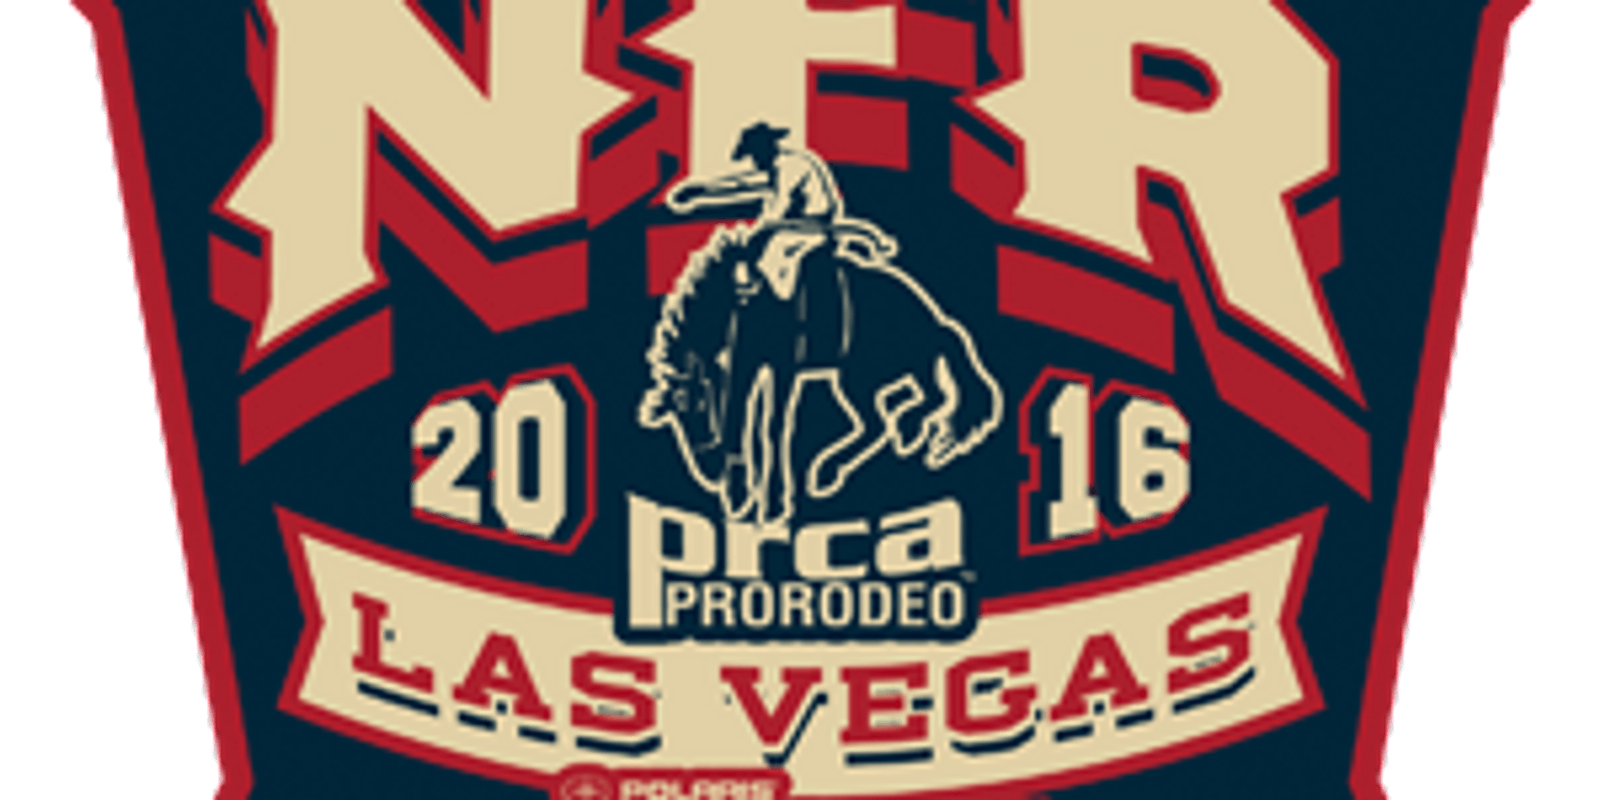 NFR Logo - Pro rodeo: Ryder Wright continues NFR surge